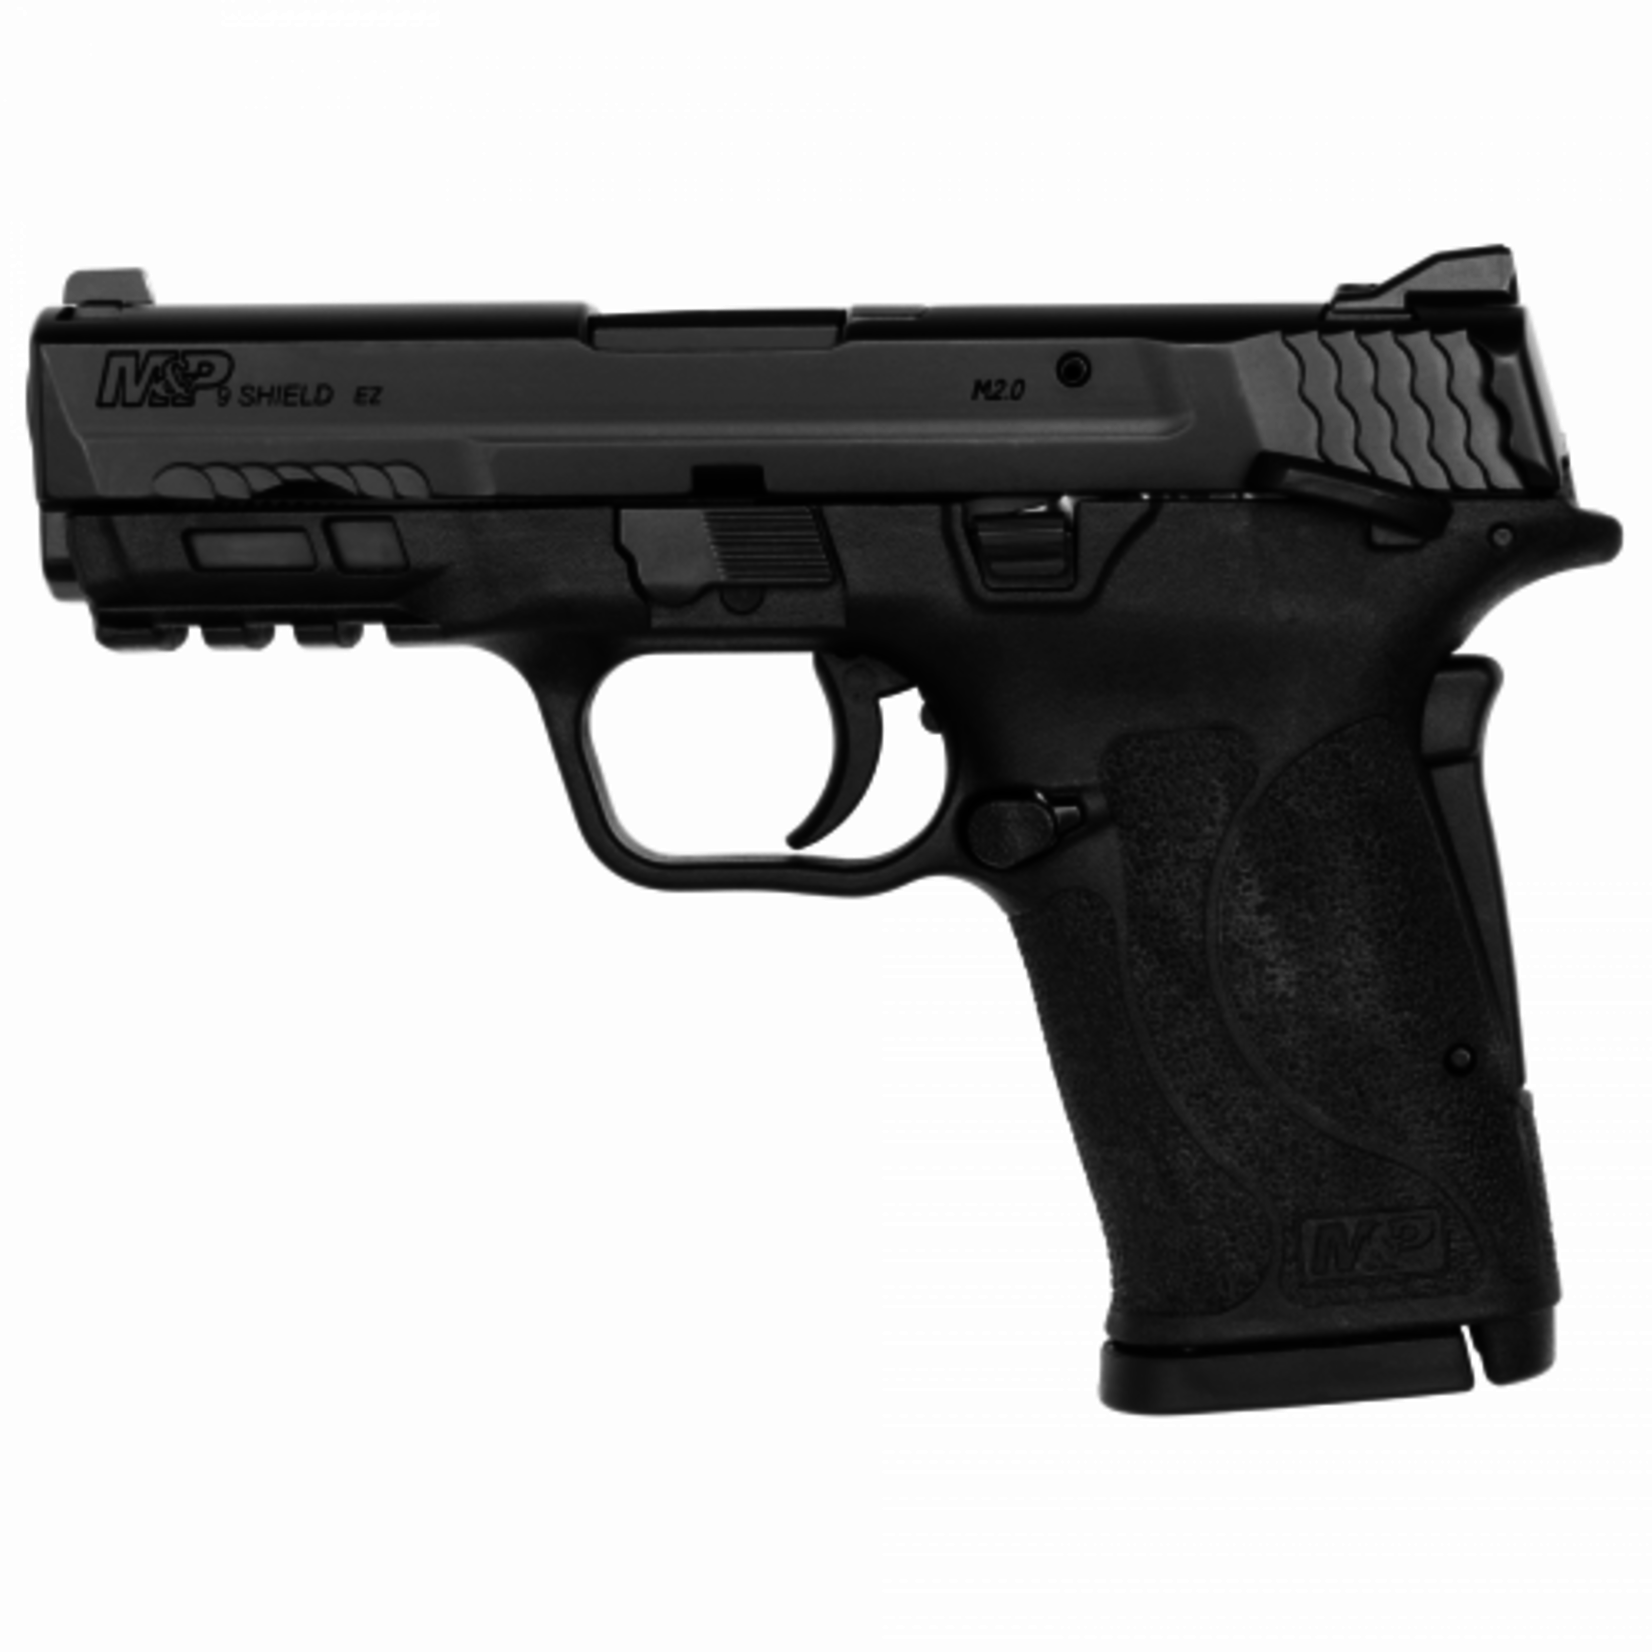 Smith and Wesson S&W Shield M2.0 M&P 9MM EZ w/ safety